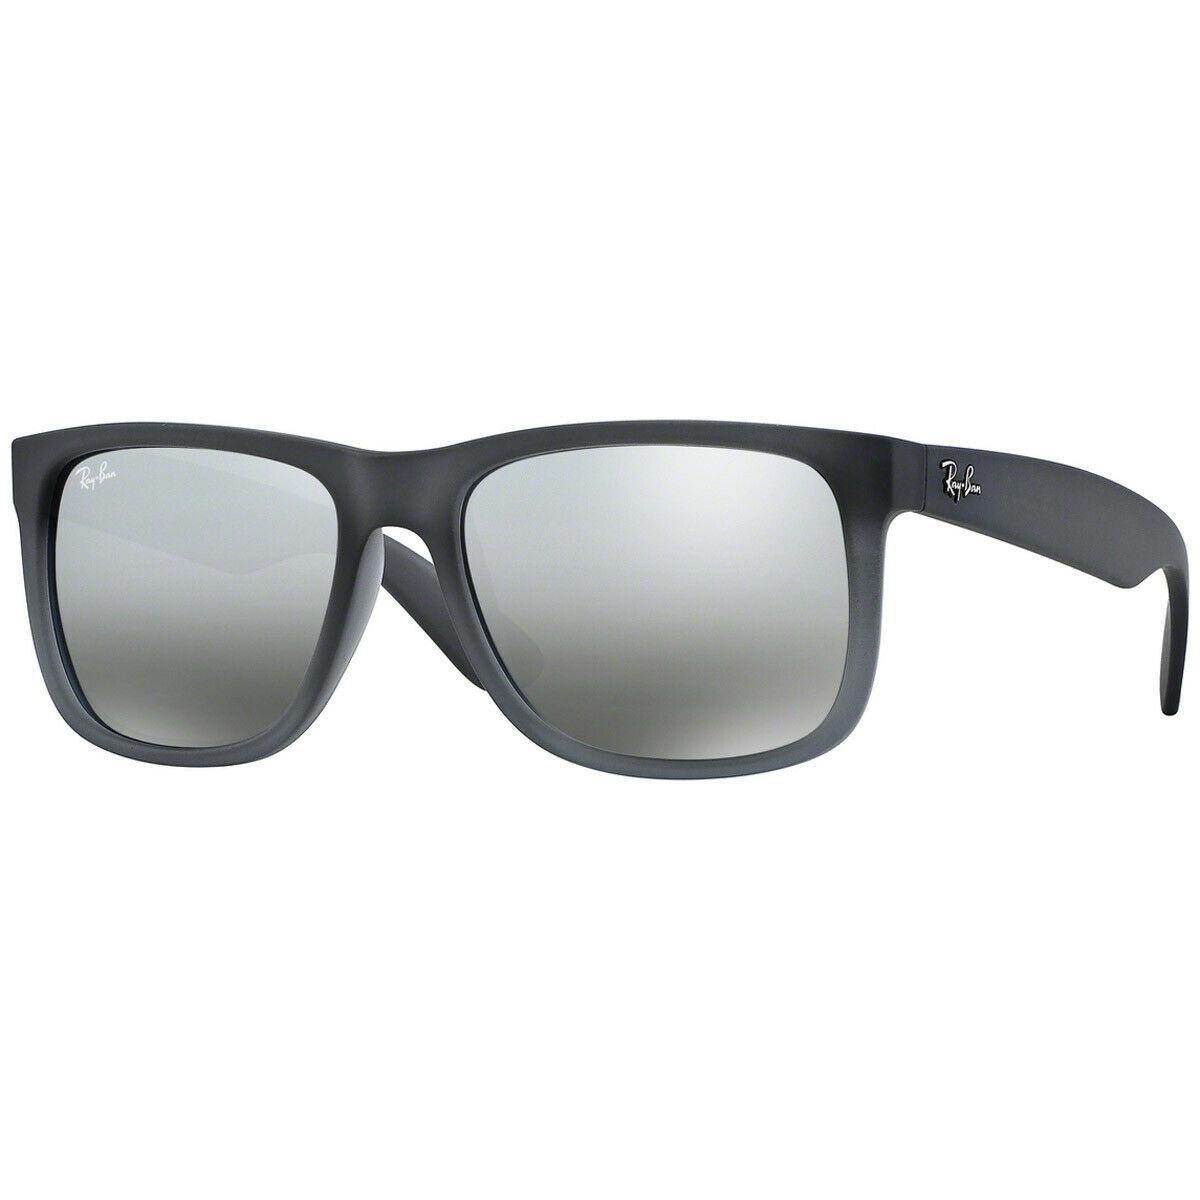 Ray-ban RB4165852/88-55 Justin Gray Rubber Gray Silver Mirror Unisex Sunglasses - Gray Frame, Gray Lens